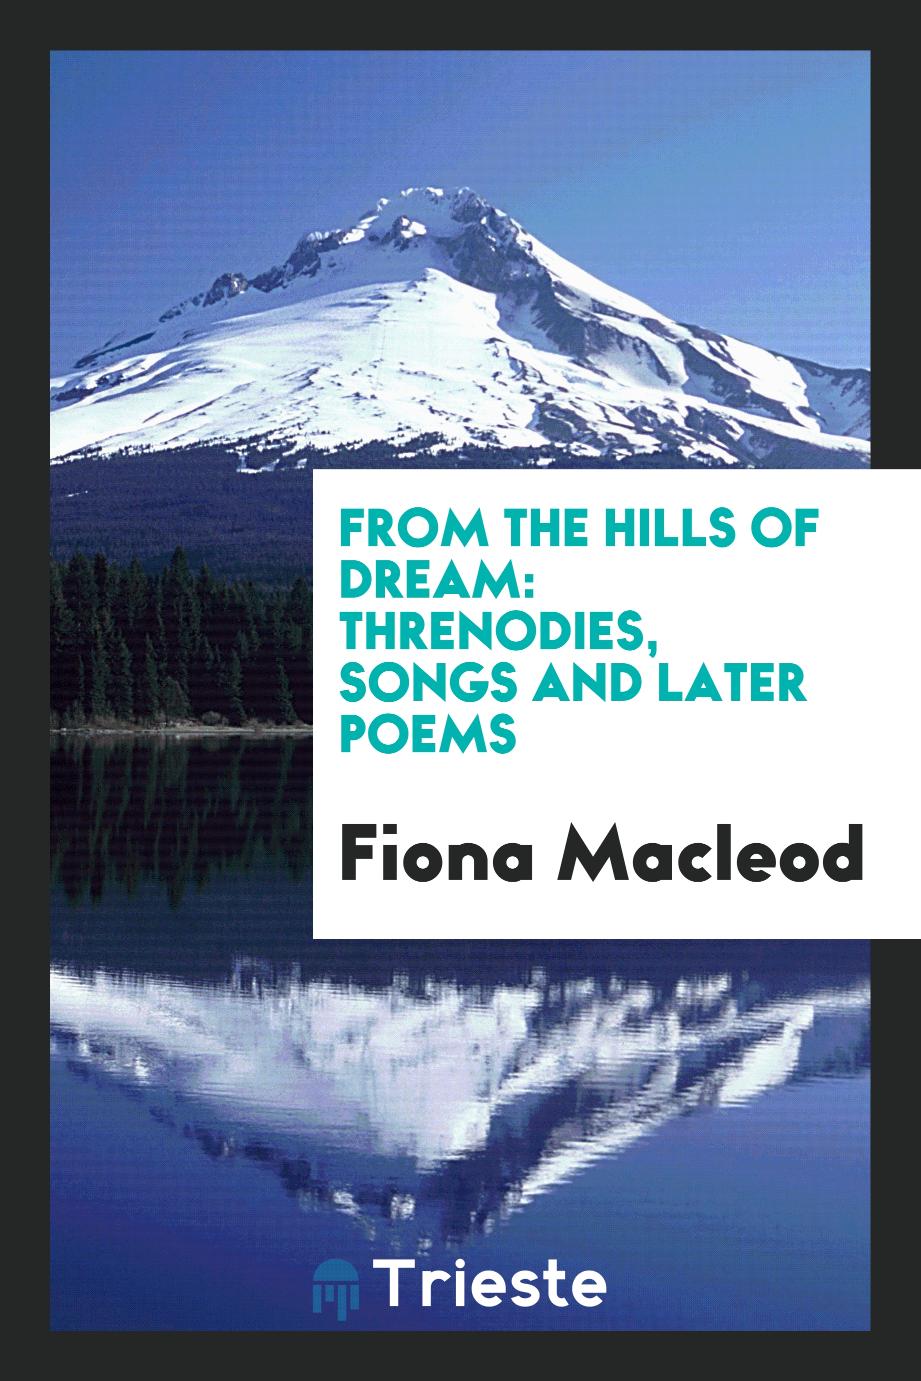 From the hills of dream: threnodies, songs and later poems